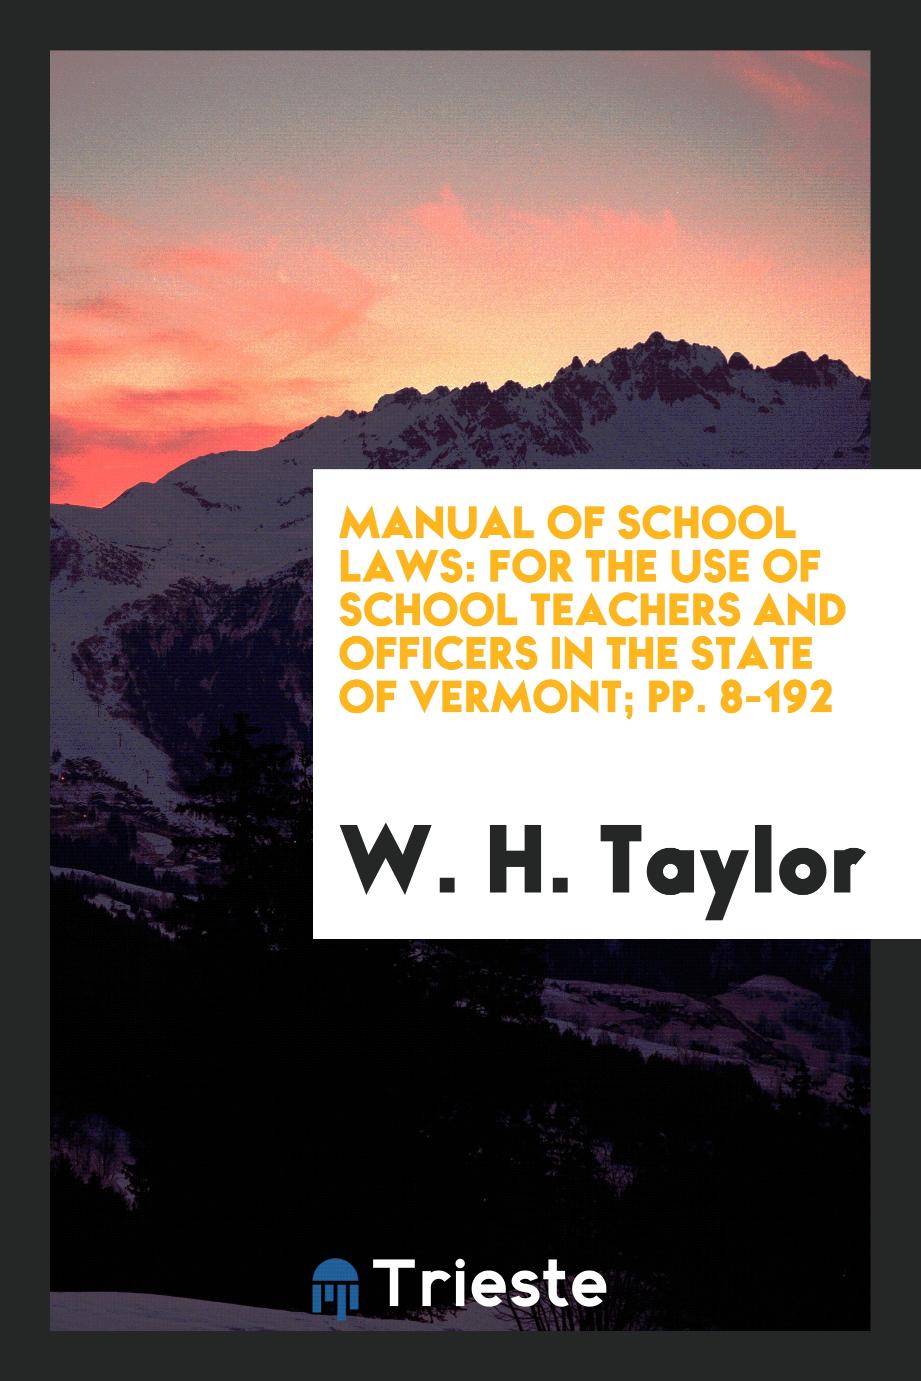 Manual of School Laws: For the Use of School Teachers and Officers in the State of Vermont; pp. 8-192